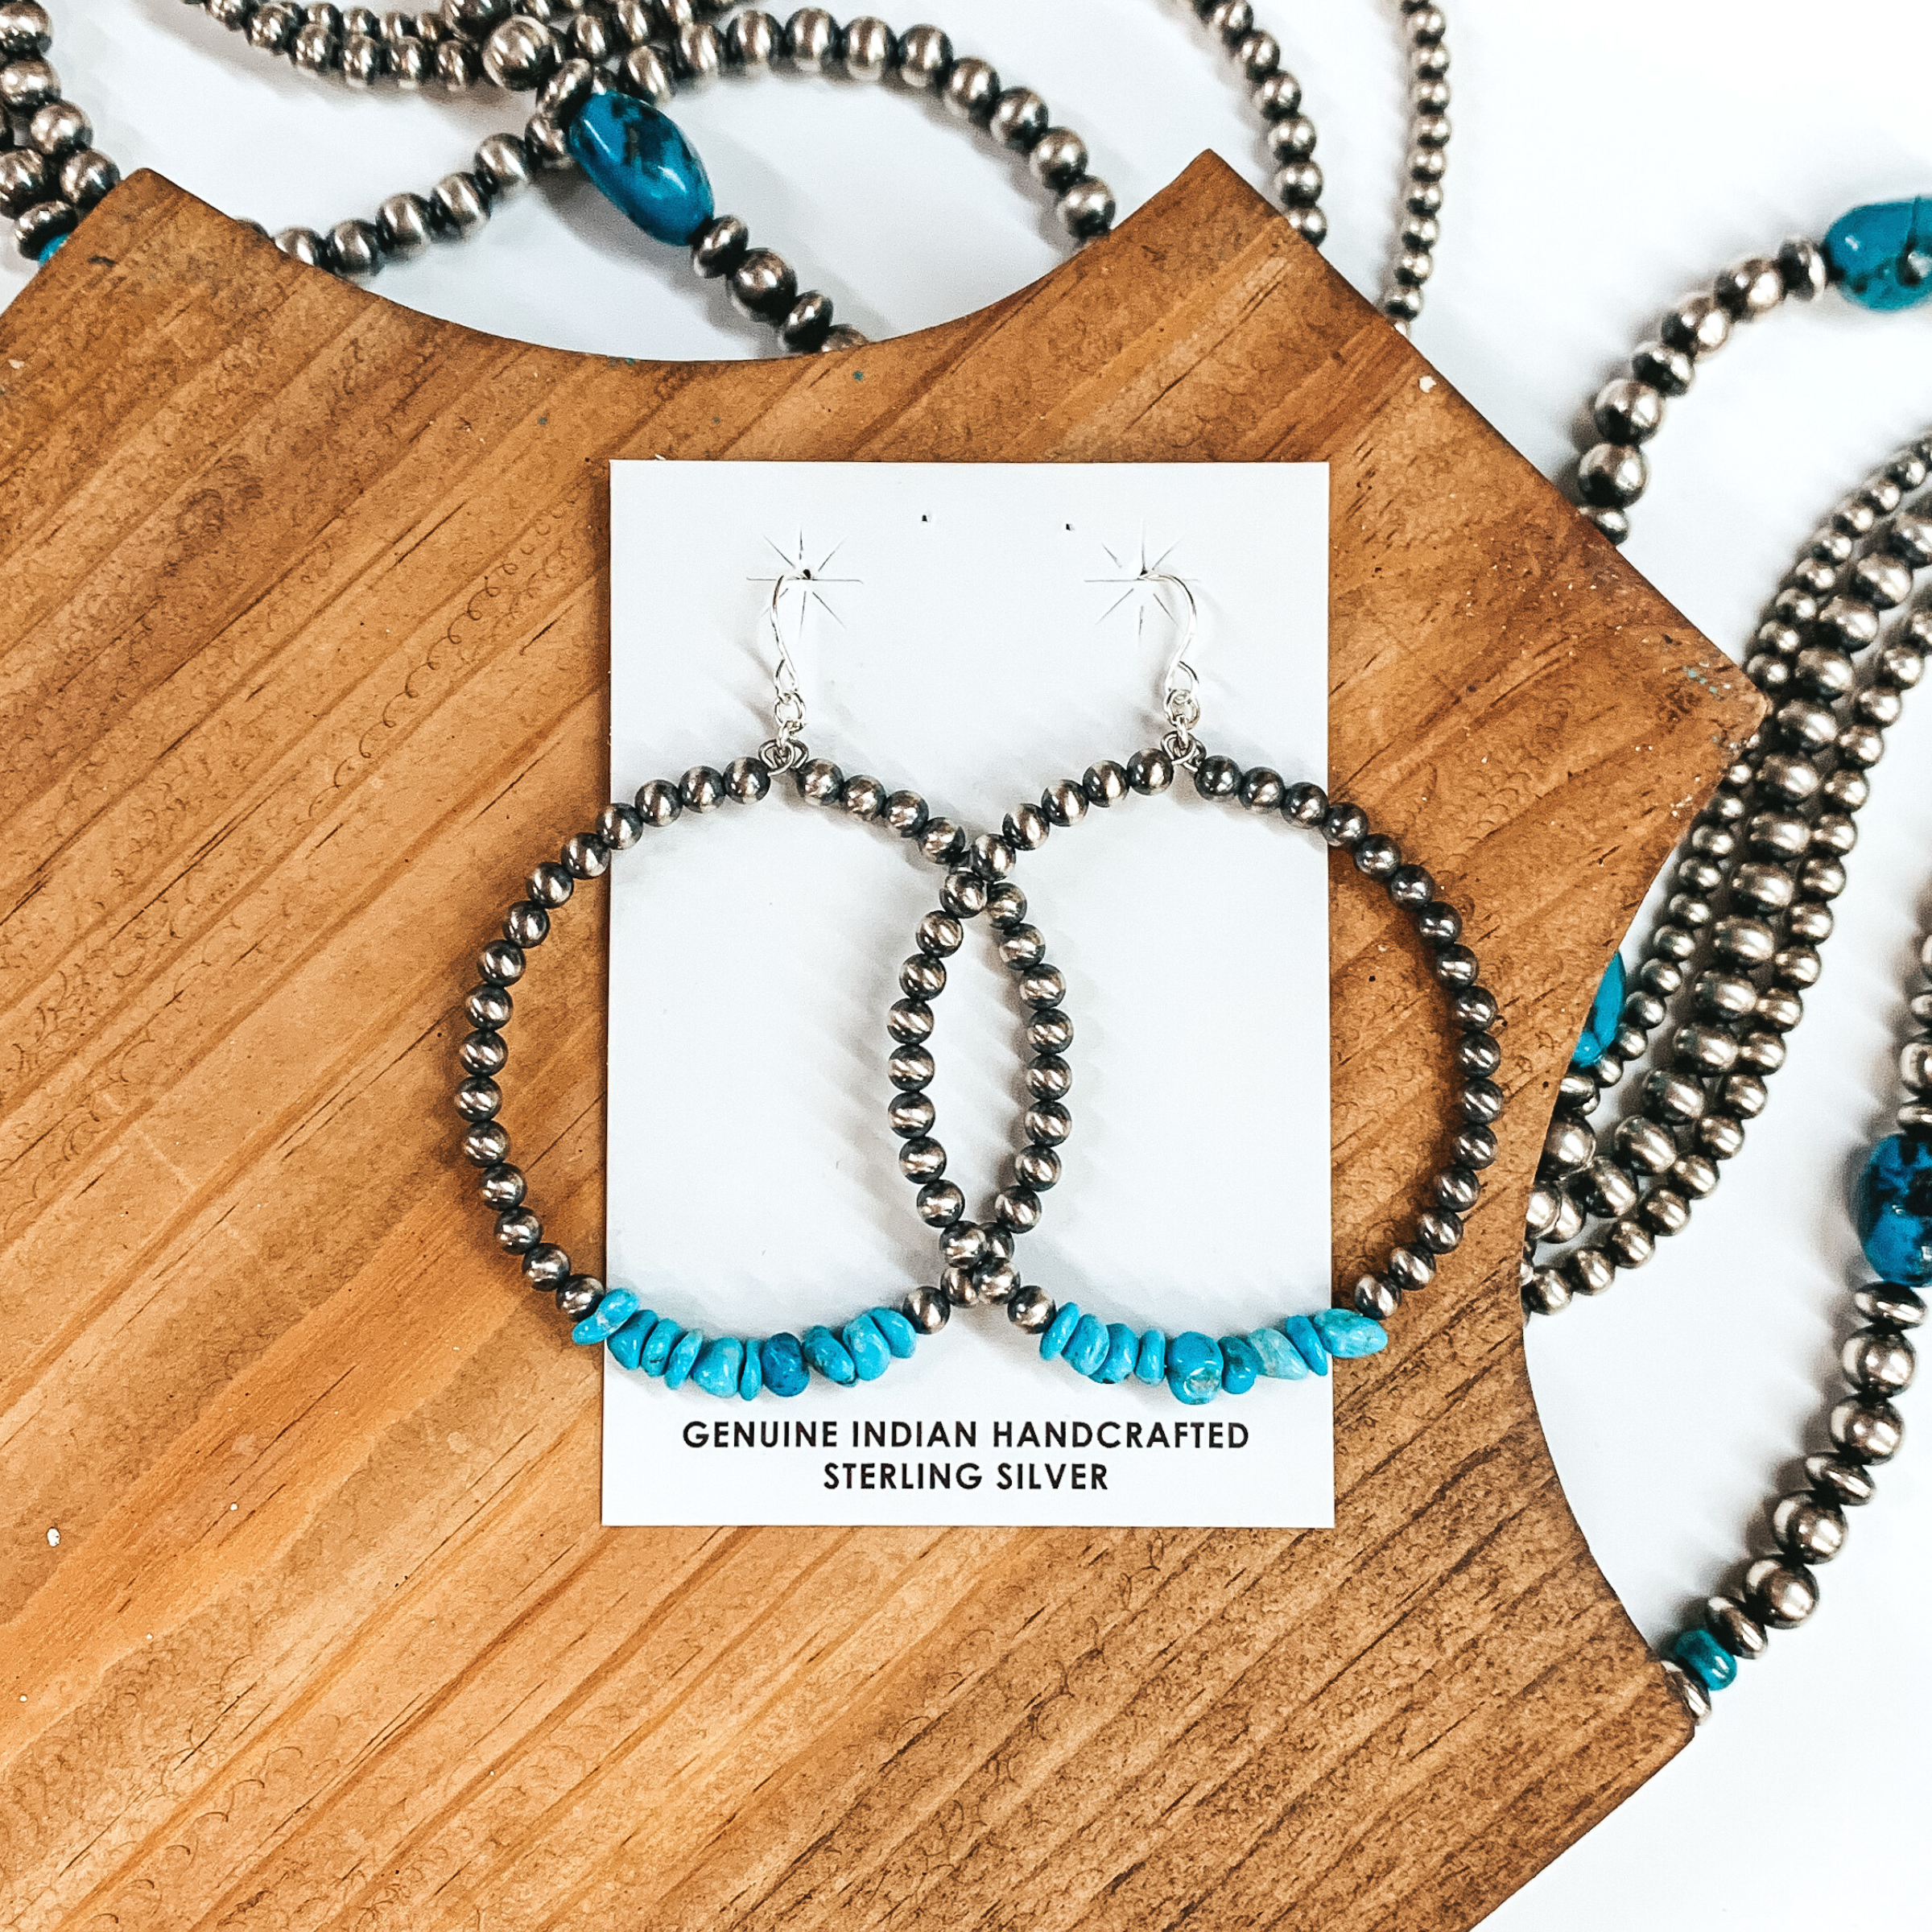 Silver fish hook earrings with a hanging silver beaded circle pendant that includes a section of turquoise stones. These earrings are pictured on a white card holder in a brown block. This is all pictured on a white background with silver beads.